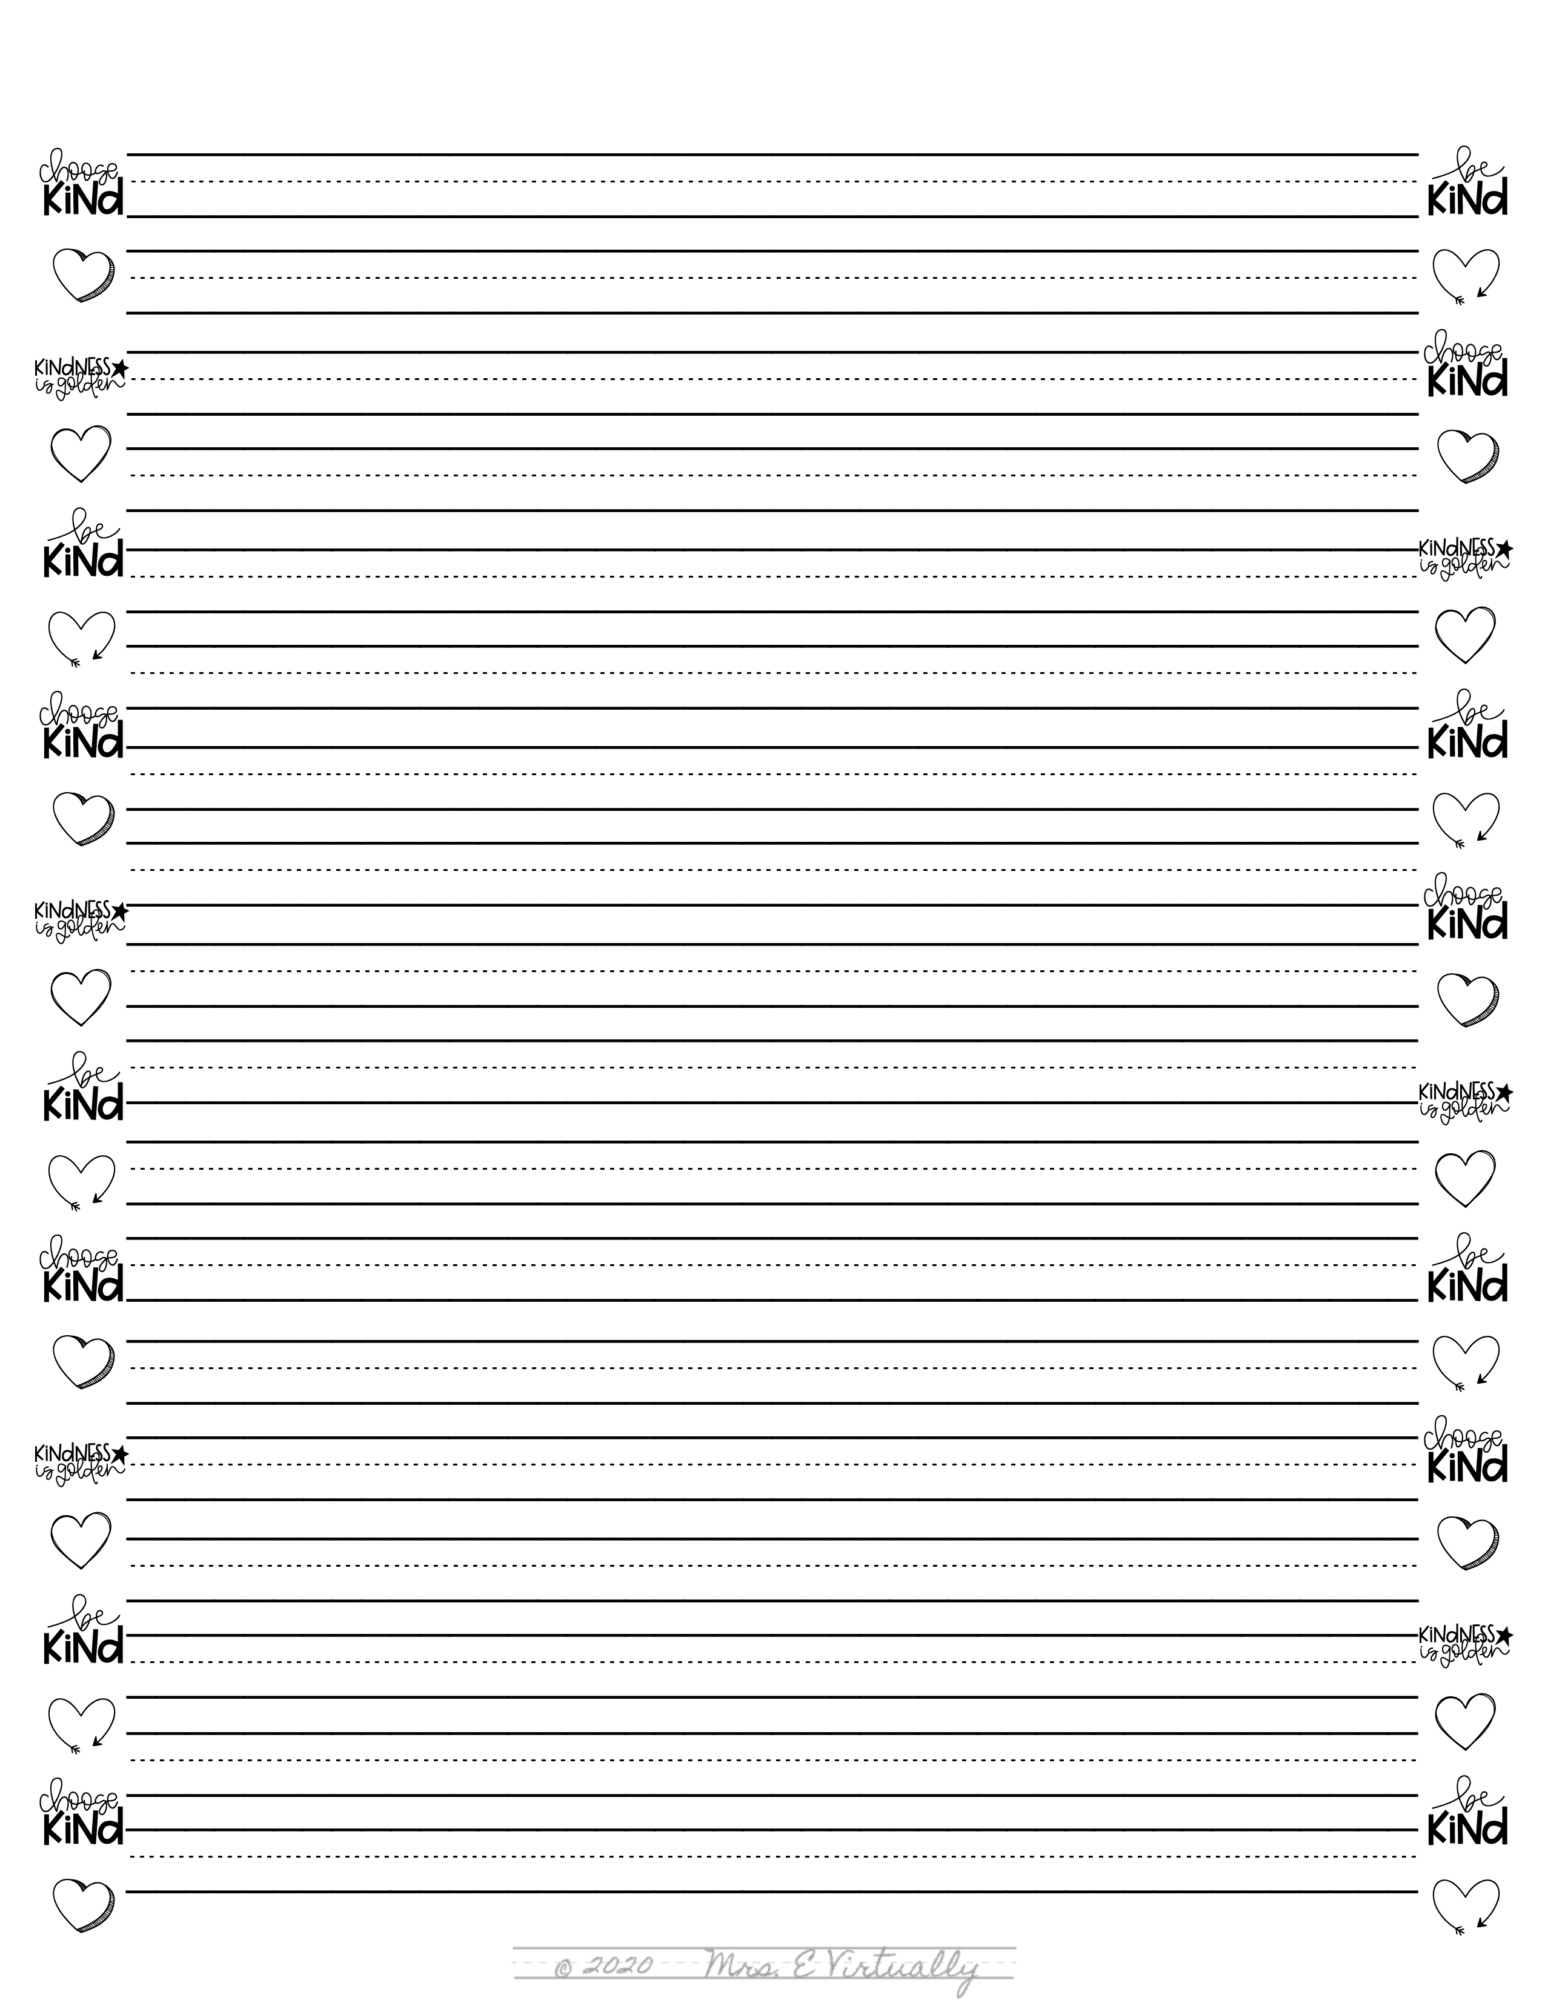 primary-paper-lined-paper-graph-paper-printable-handwriting-paper